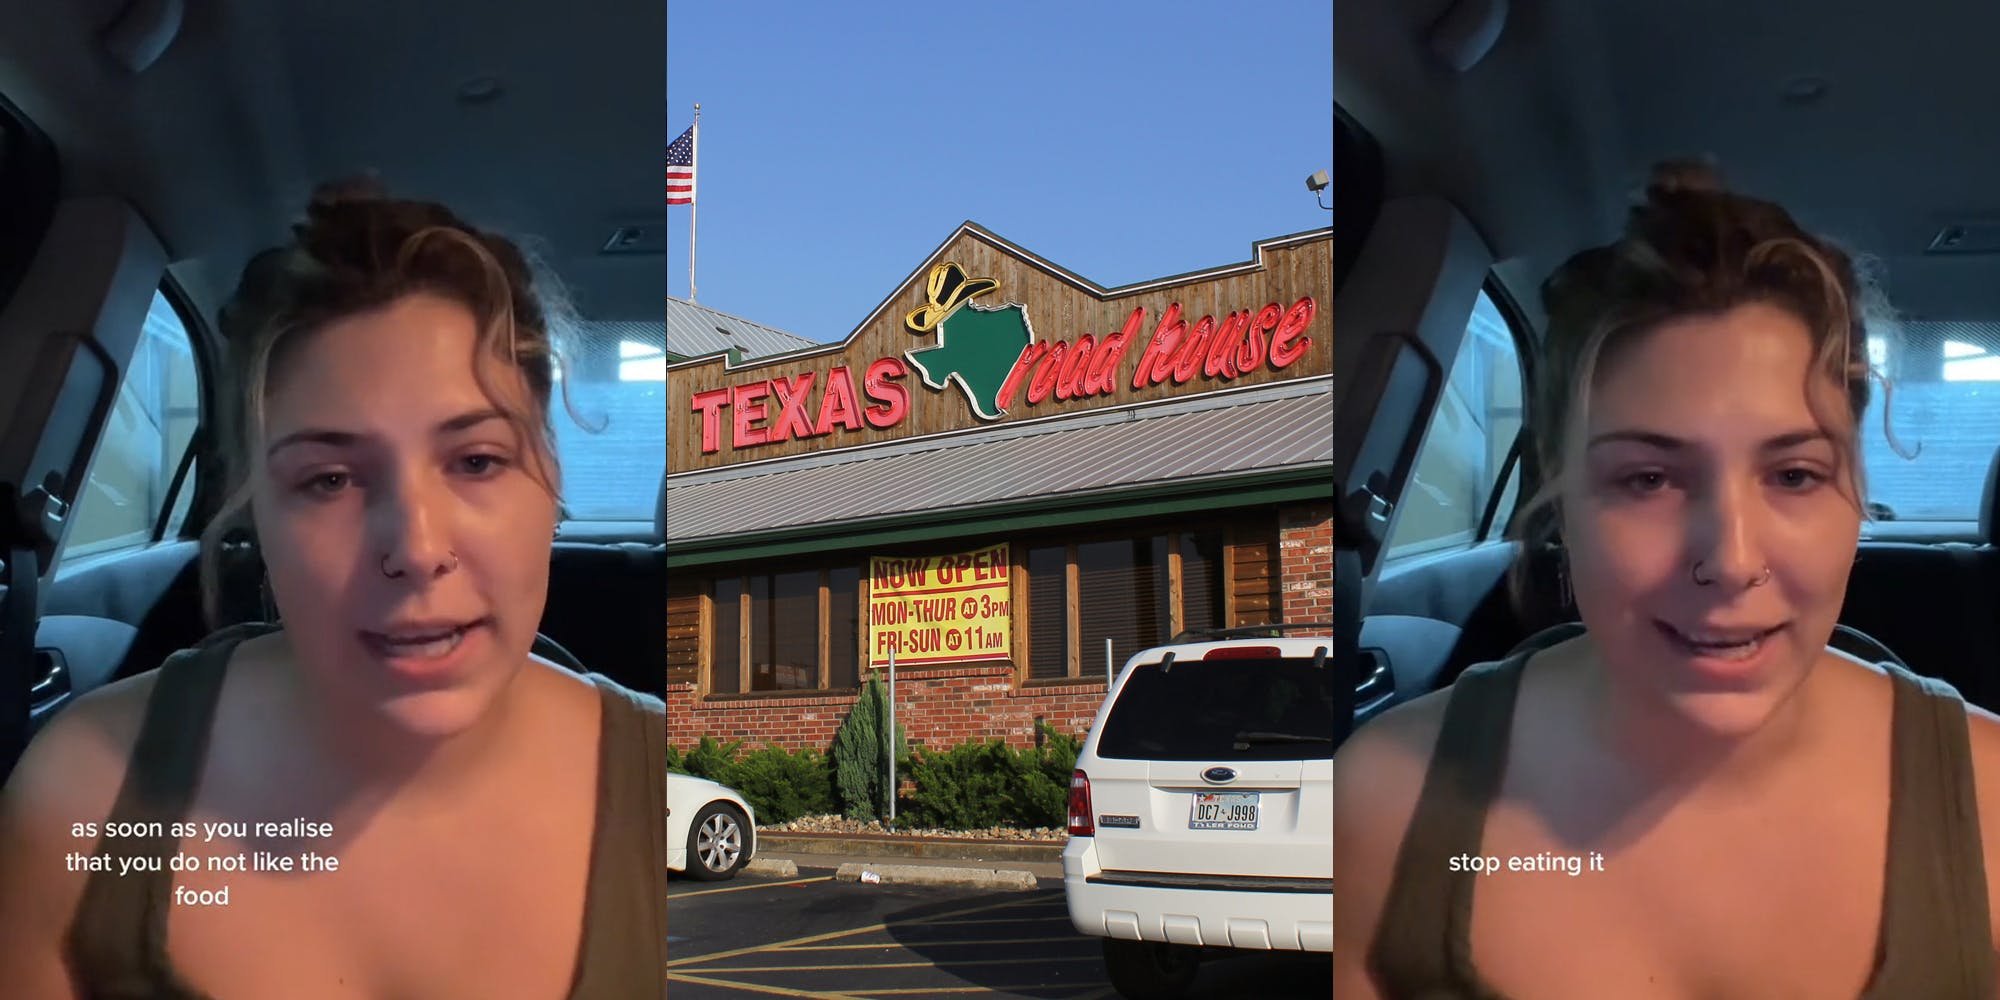 ‘First off, don't be scared to send your food back’: Texas Roadhouse server shares how to properly send food back